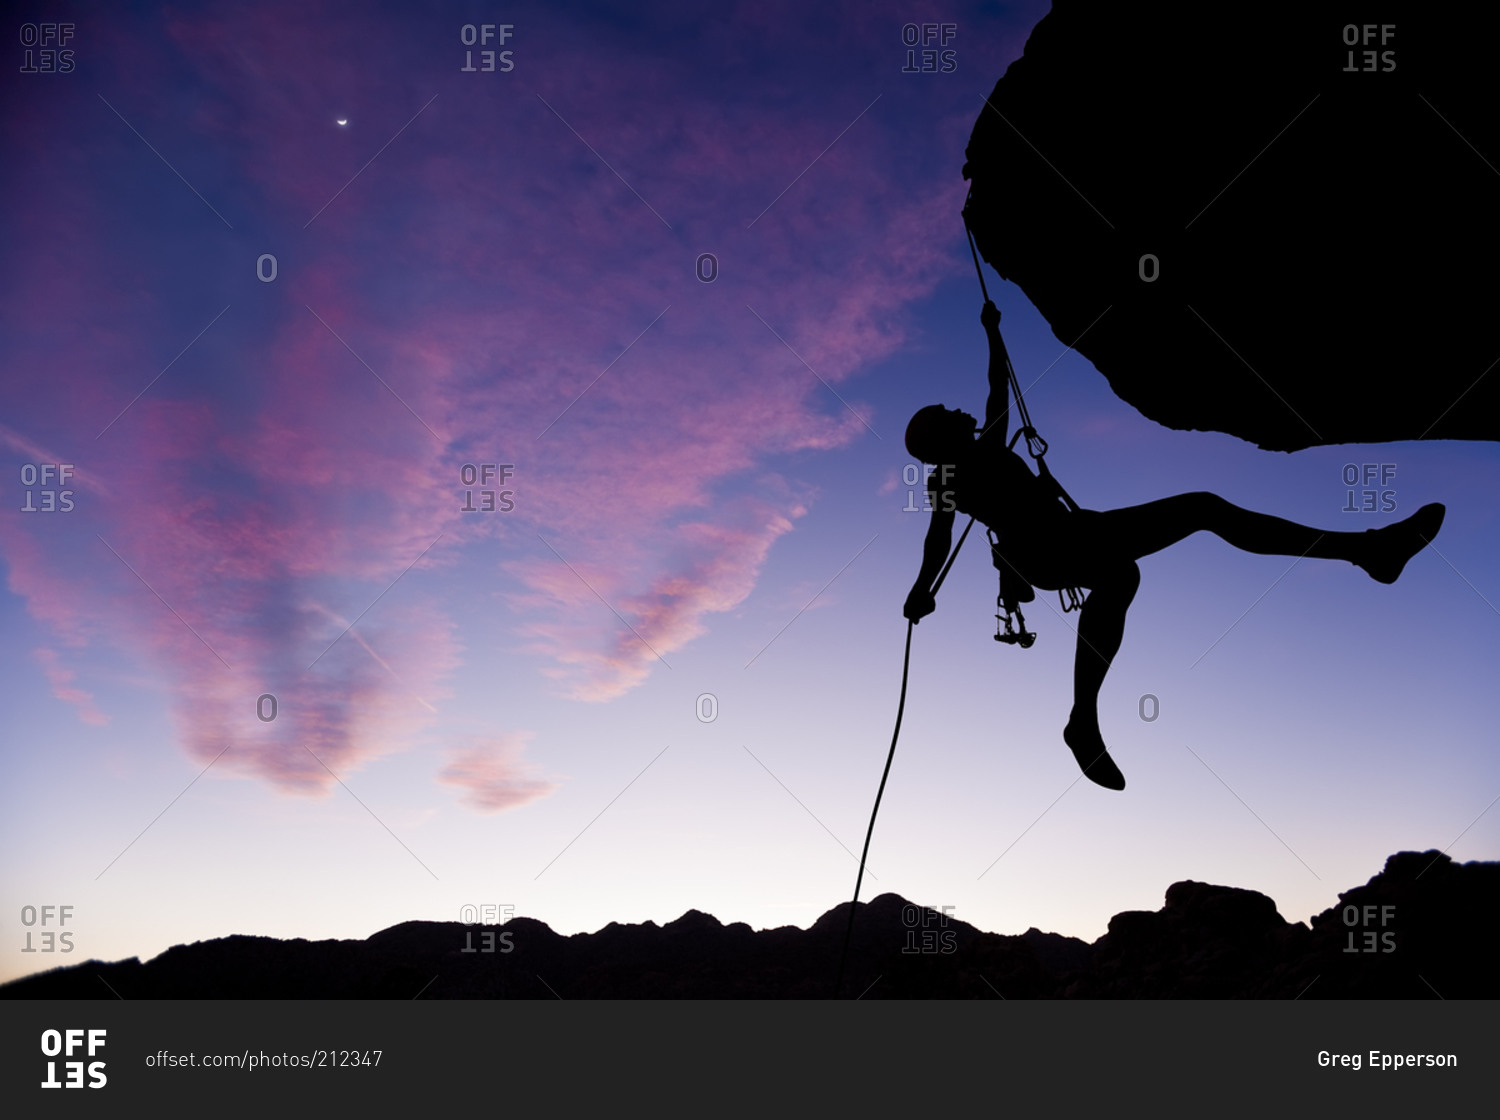 Silhouette of a climber hanging from rock face at sunset